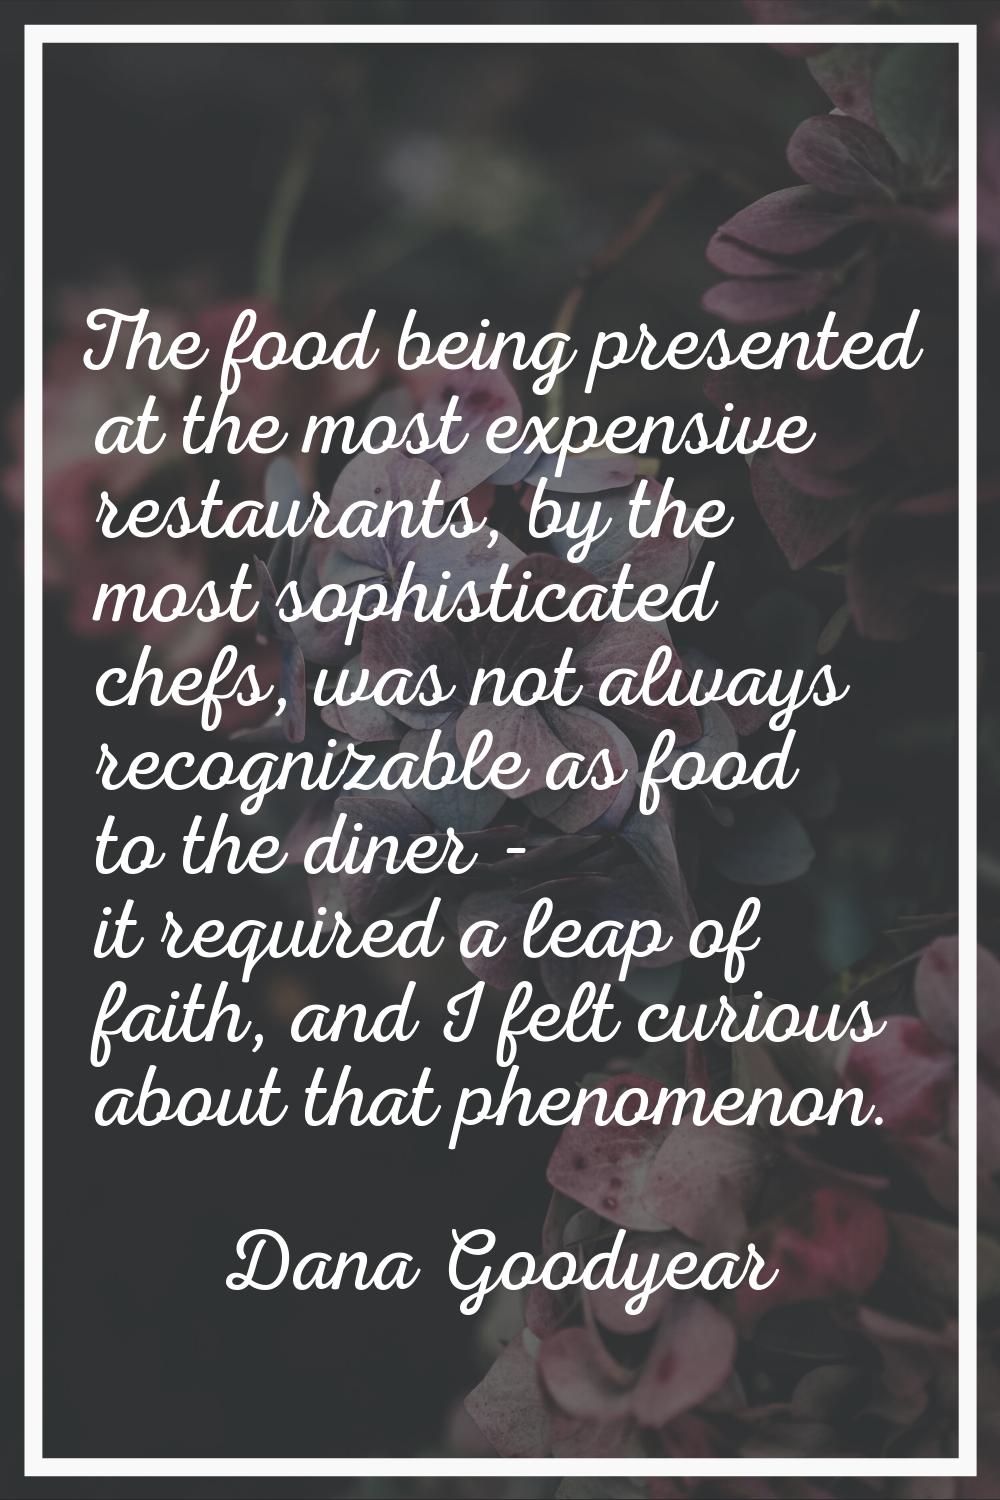 The food being presented at the most expensive restaurants, by the most sophisticated chefs, was no